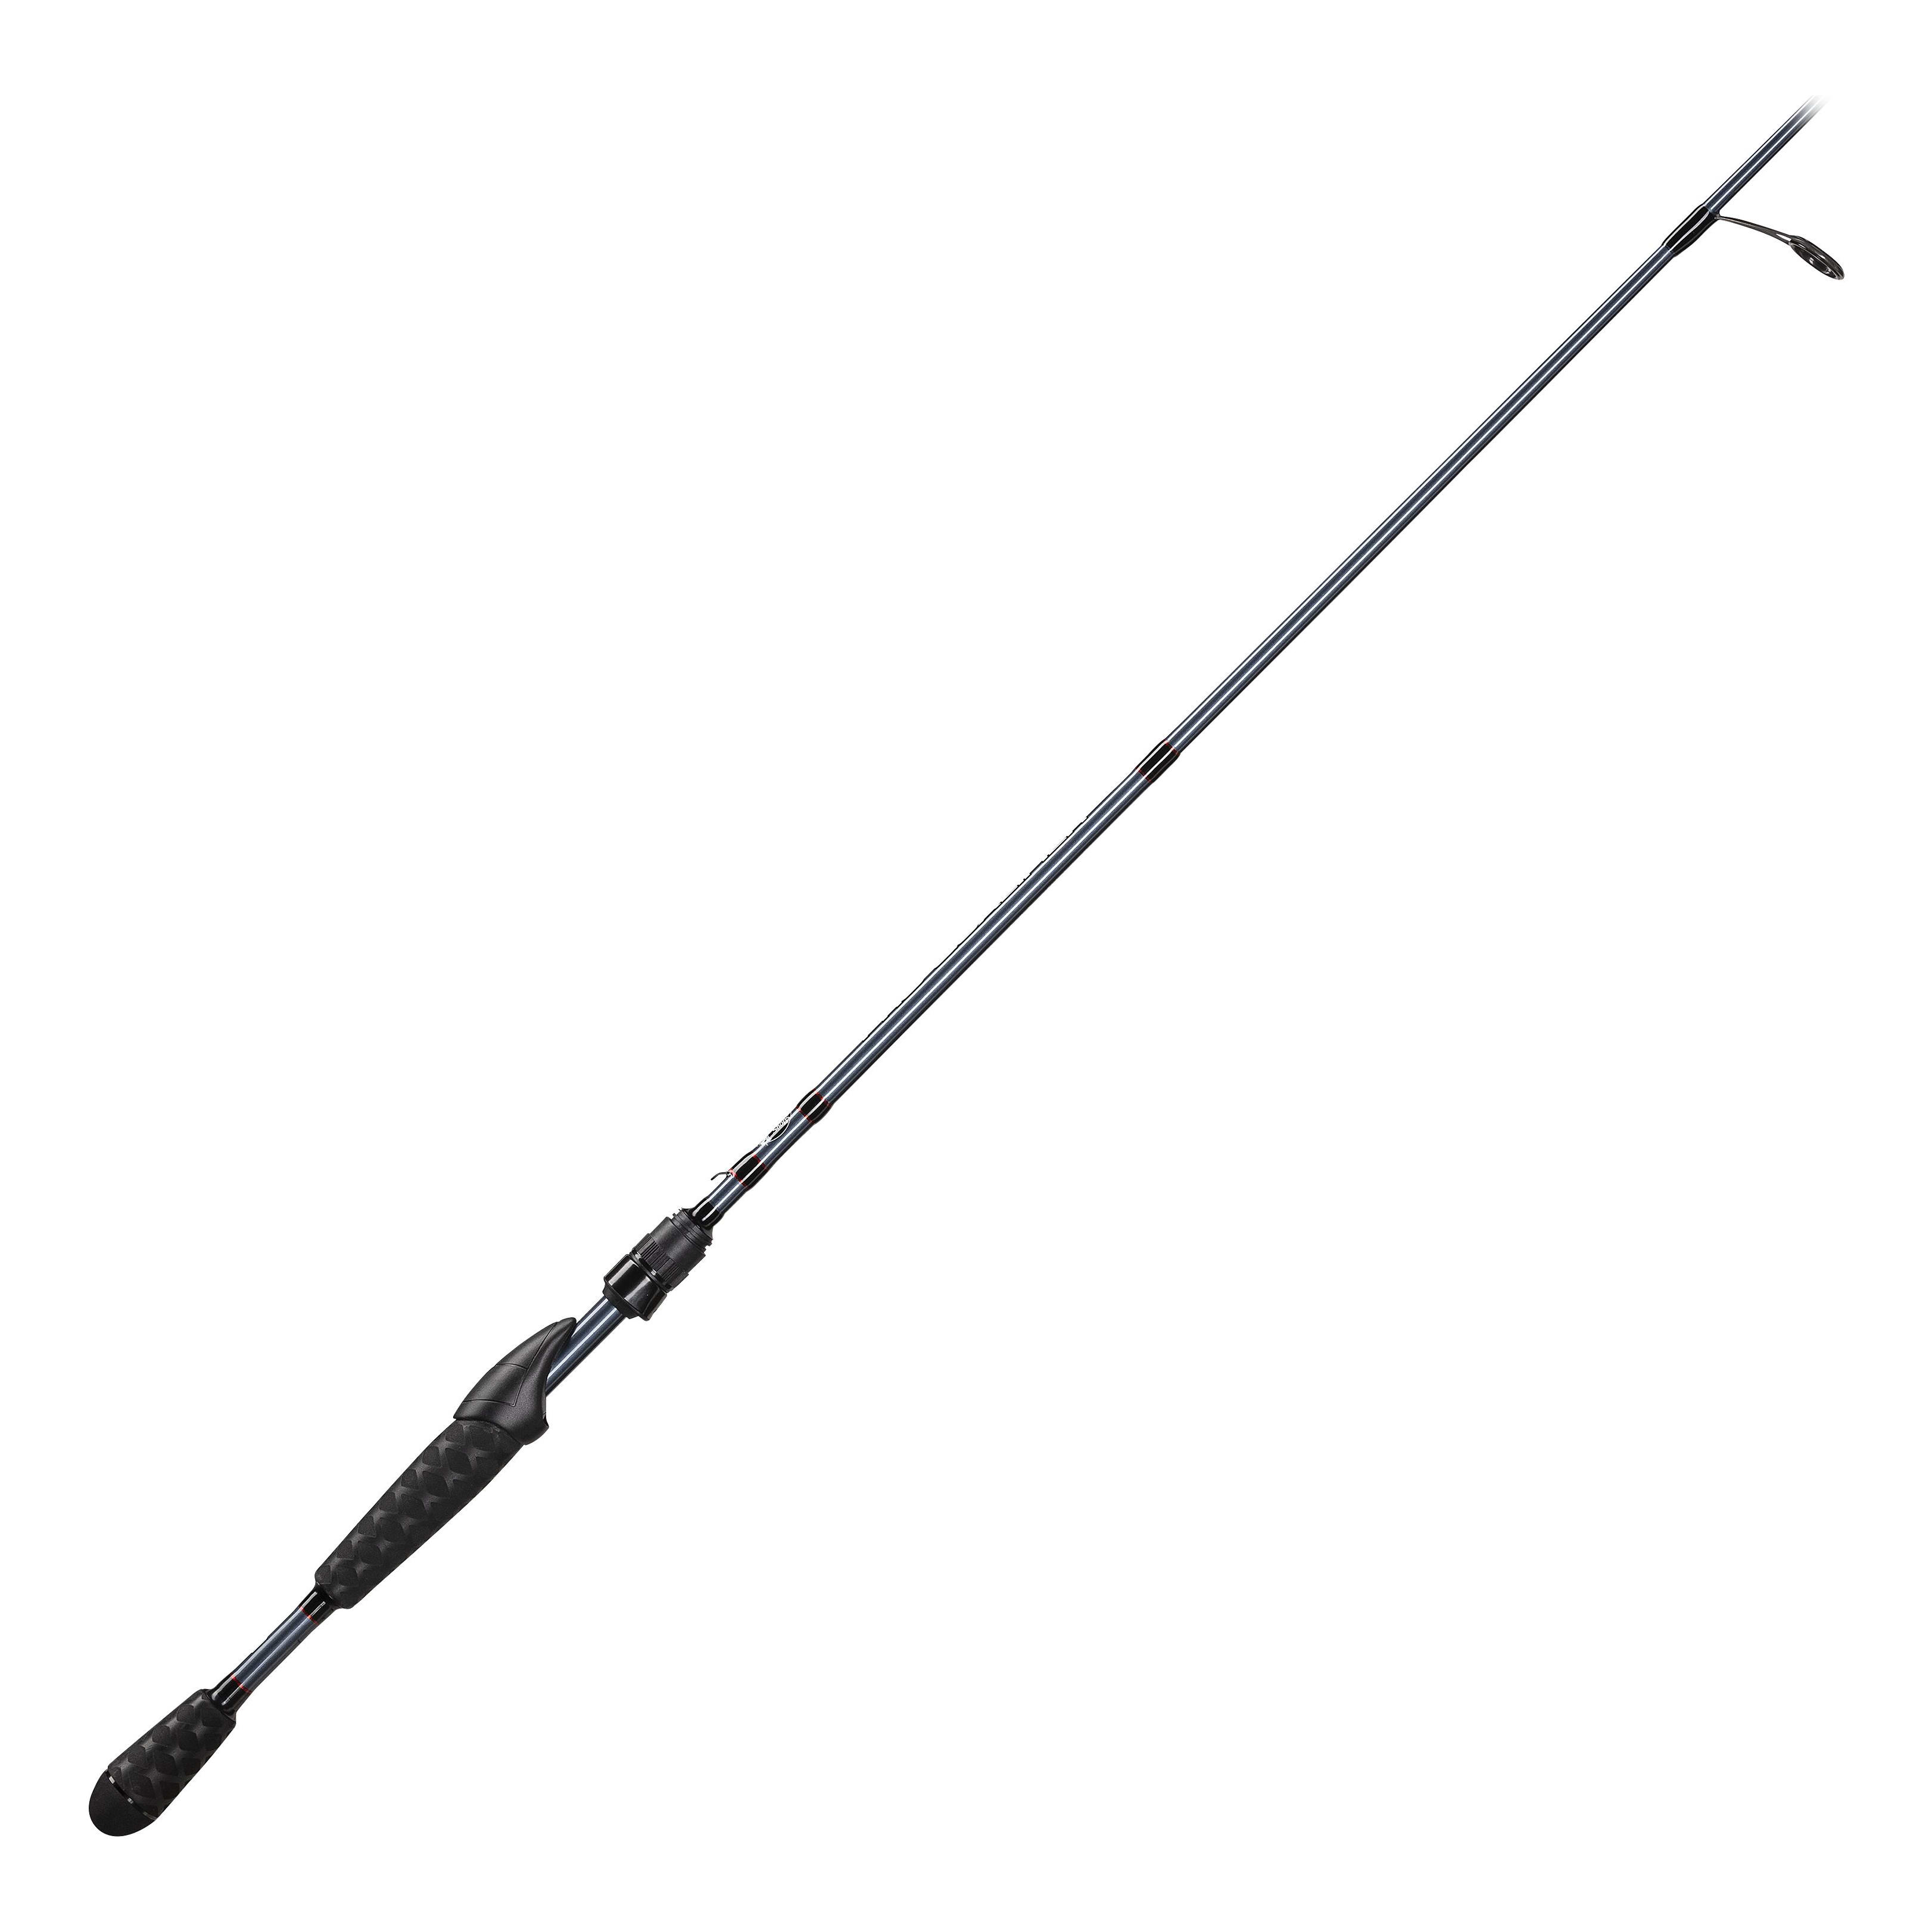 Bass Pro Shops® Pro Qualifier® Spinning Rod